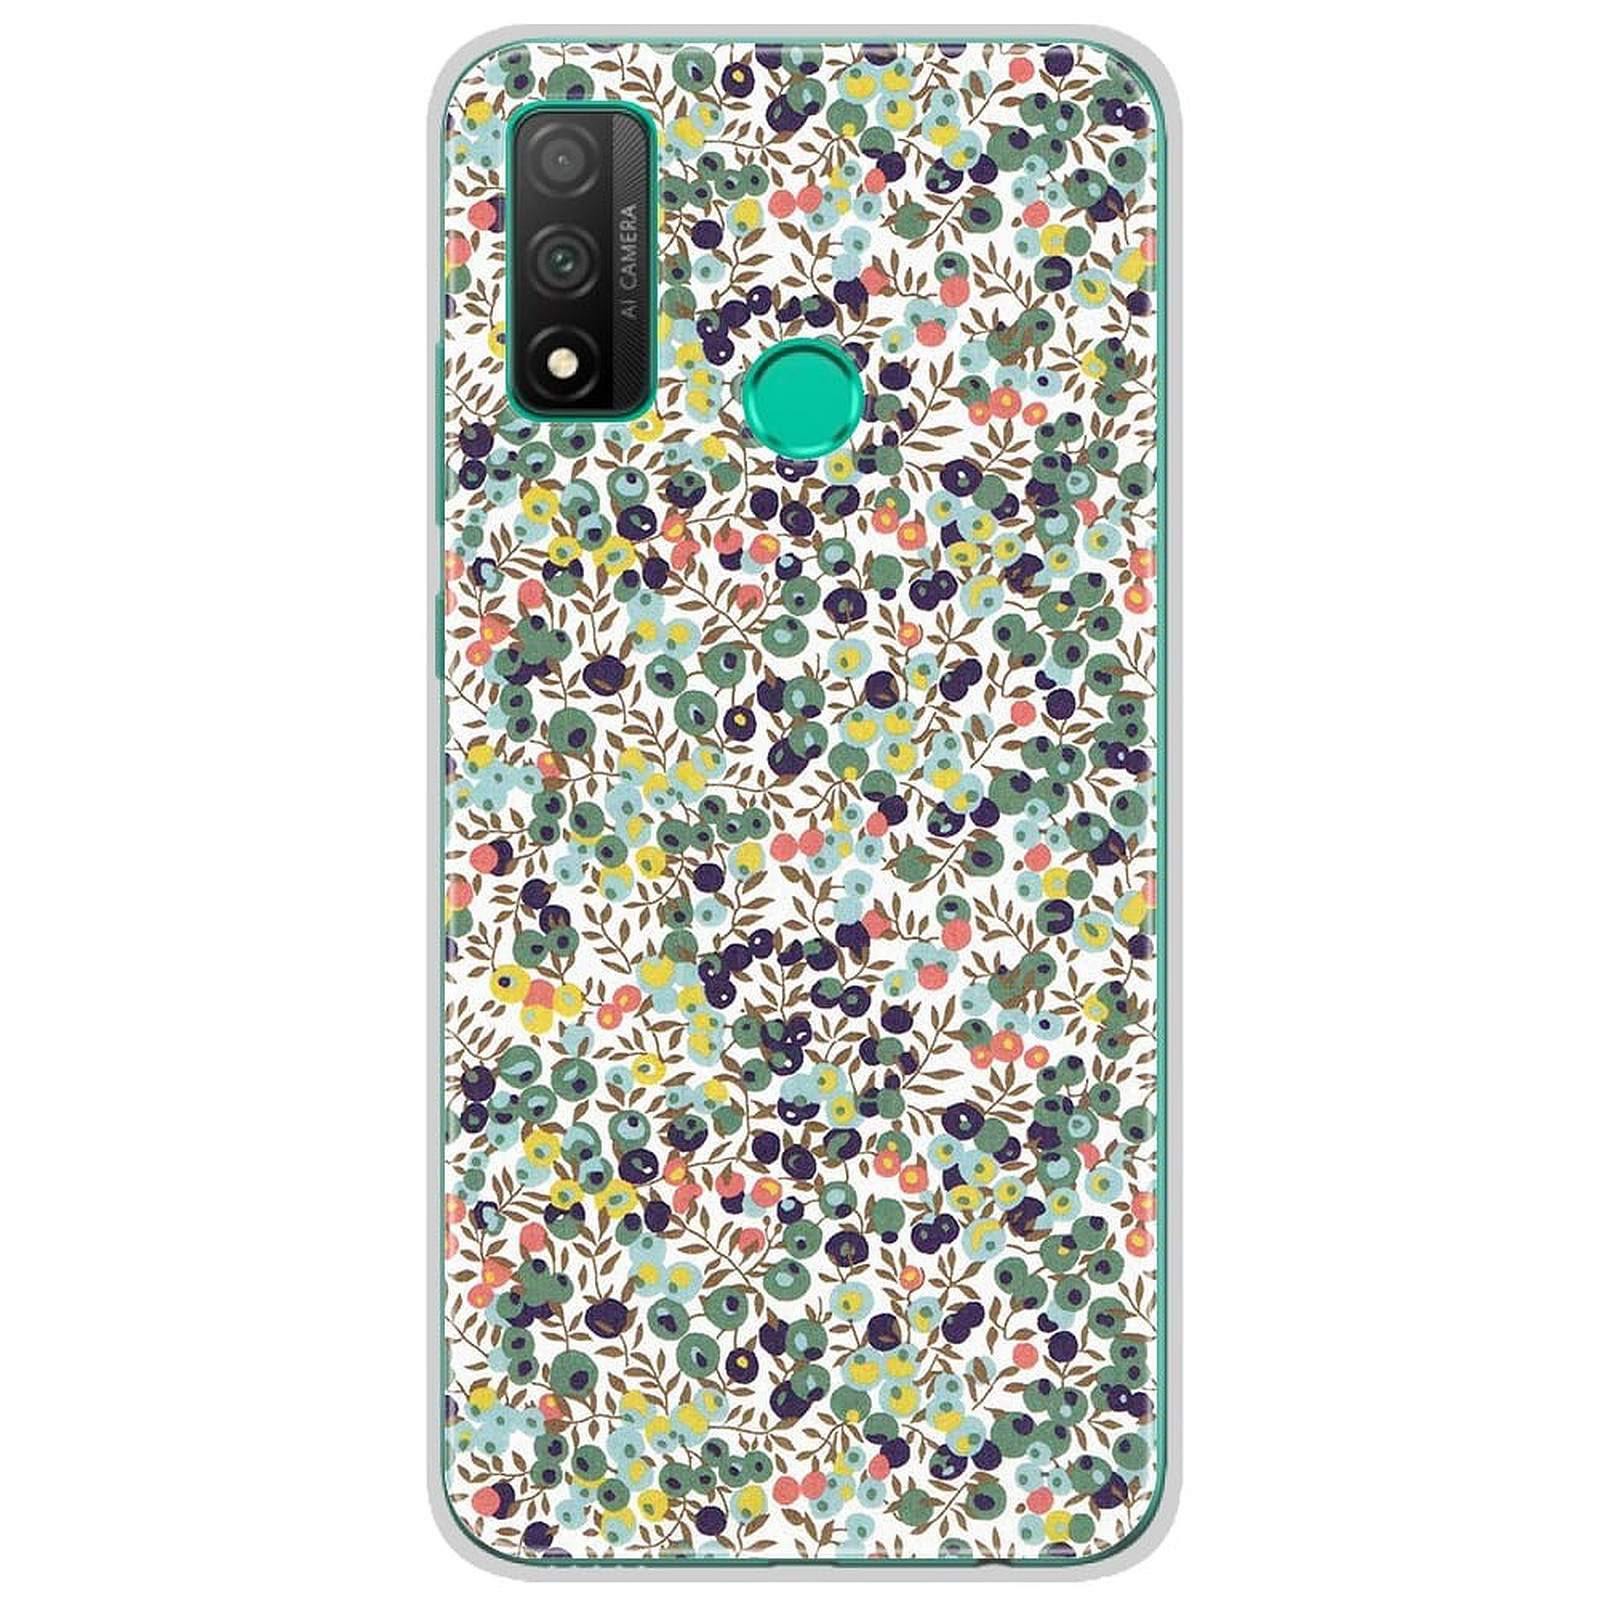 1001 Coques Coque silicone gel Huawei P Smart 2020 motif Liberty Wiltshire Vert - Coque telephone 1001Coques